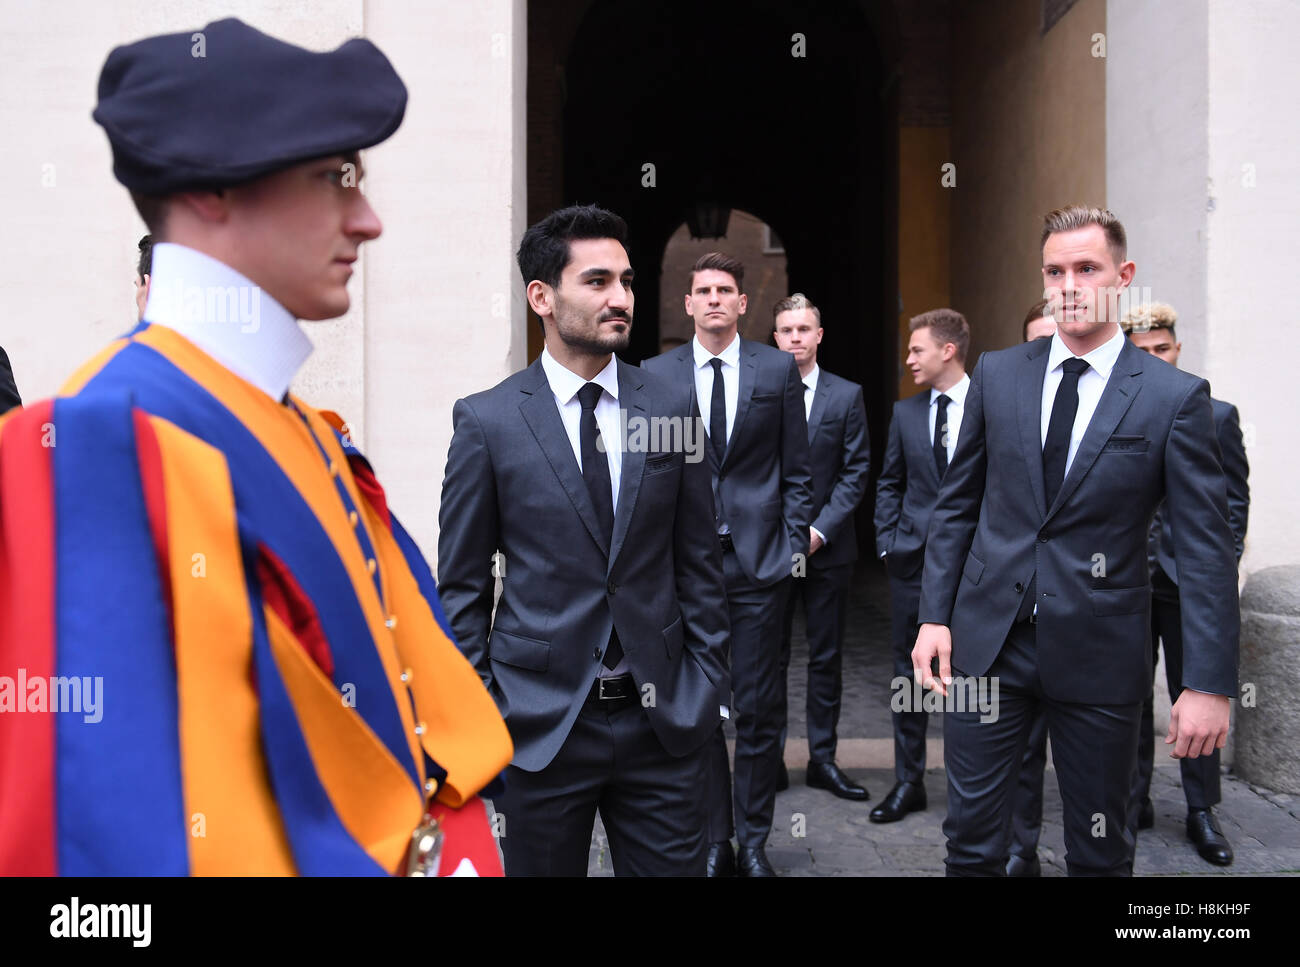 Vatican. 14th Nov, 2016. Ilkay GUENDOGAN, DFB 21 Marc-Andre TER STEGEN, TW DFB 22 Mario GOMEZ, DFB 23 Joshua KIMMICH, DFB 18 German Soccer National Team visits Pope Francis in a private audience in the Vatican City at November 14, 2016 Credit:  Peter Schatz/Alamy Live News Stock Photo